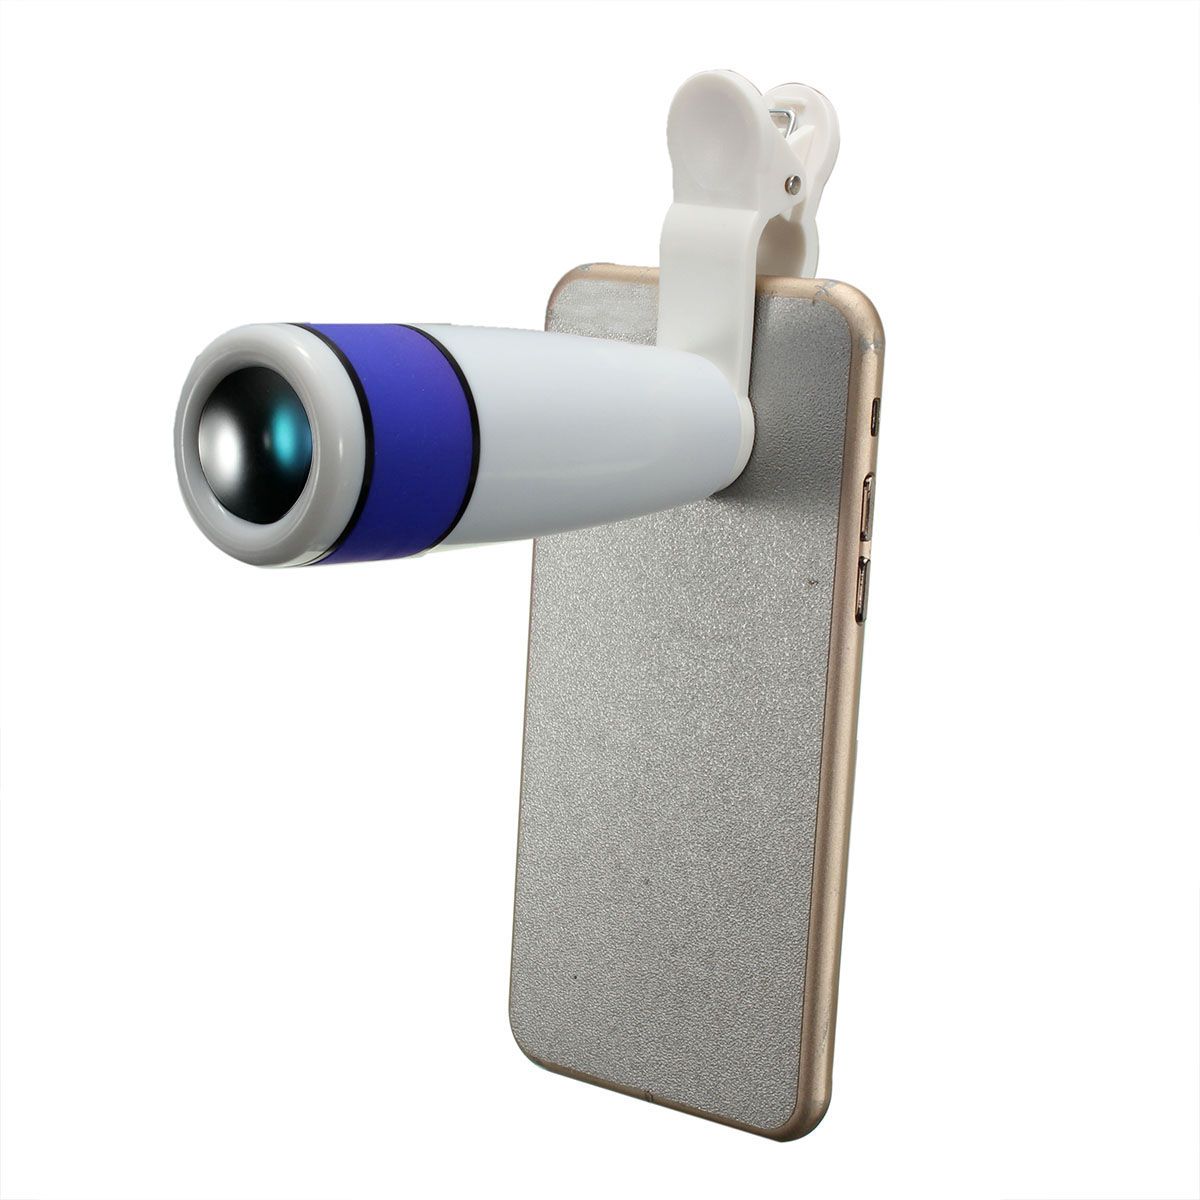 12X-Zoom-Clip-on-Phone-Telescope-Telephoto-Camera-Lens-for-iPhone-Samsung-HTC-Smartphone-1029019